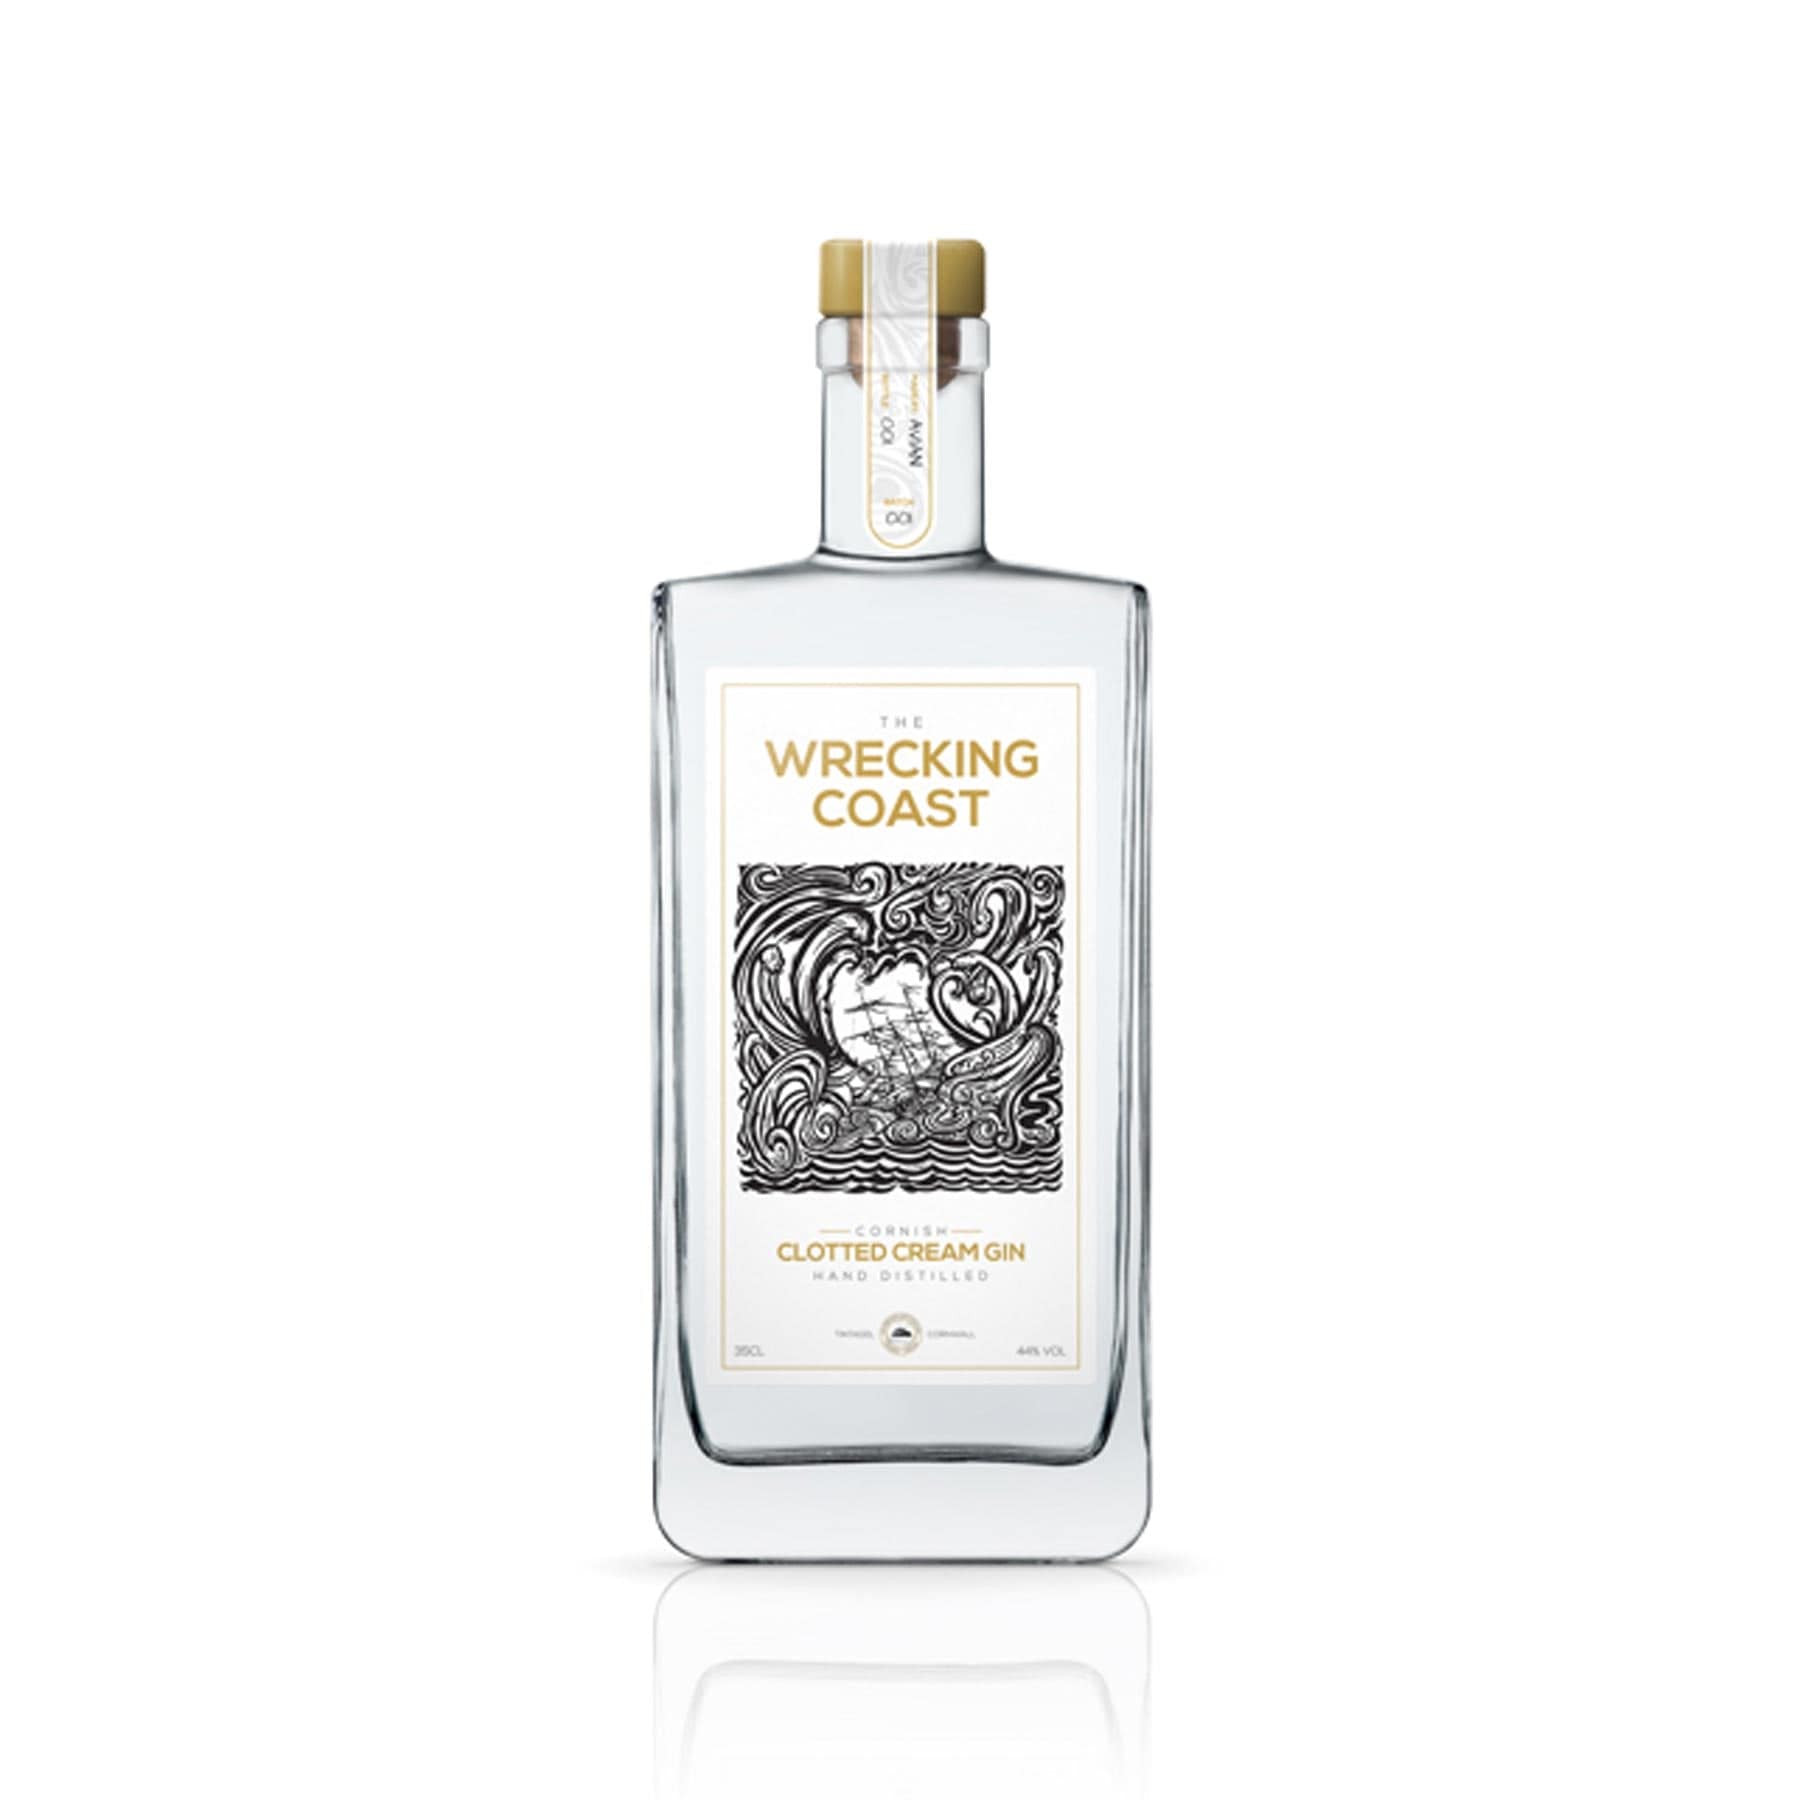 Clotted cream gin 35cl